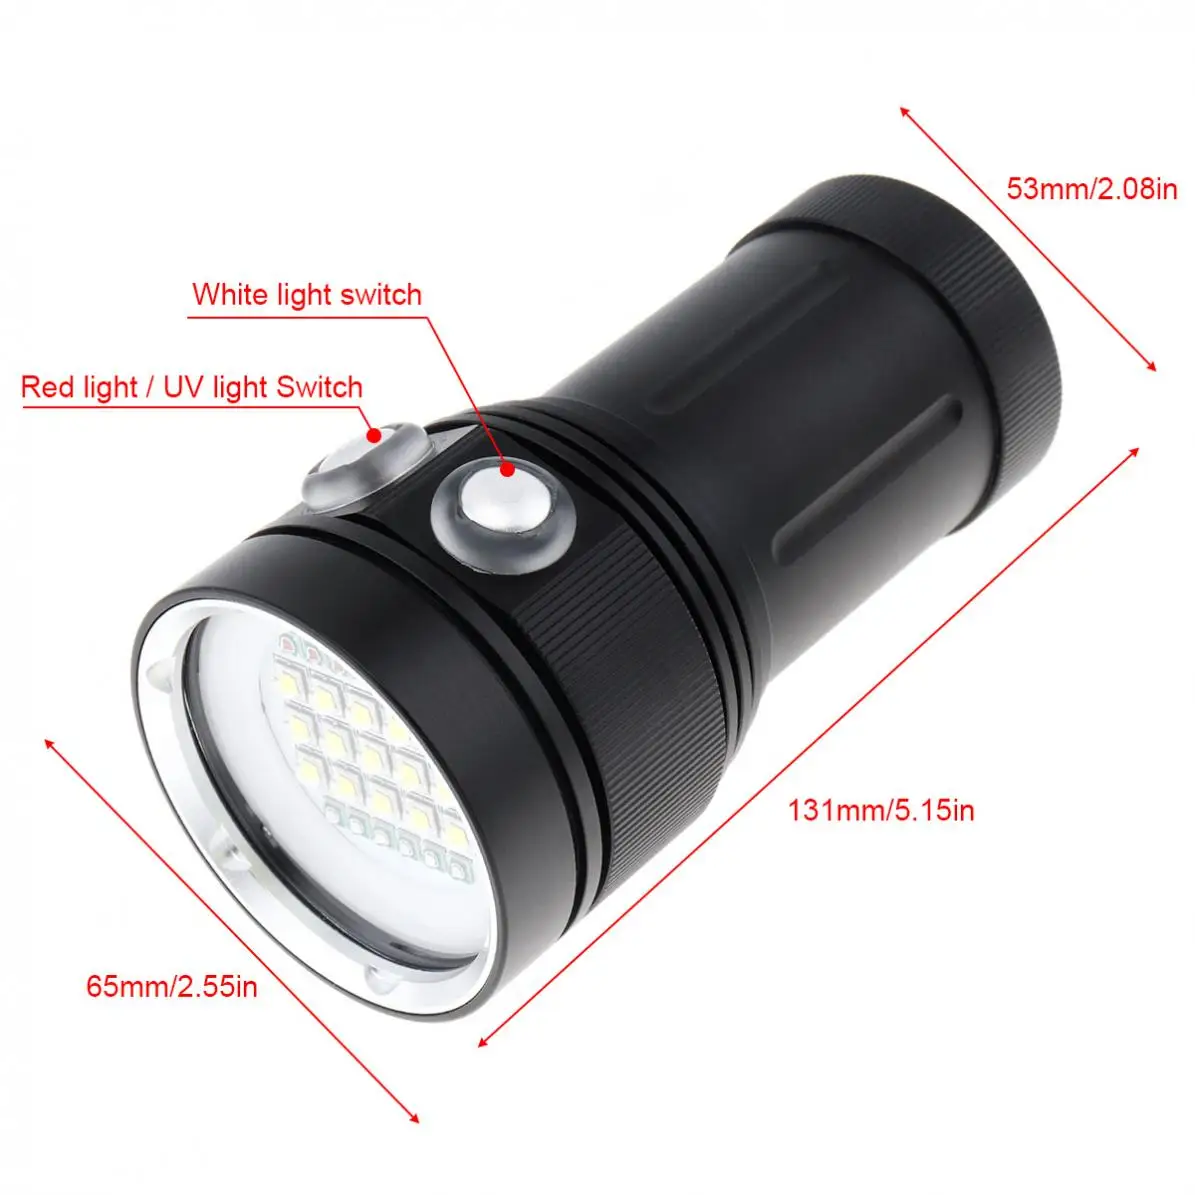 Professional Diving Flashlight Underwater 100m Scuba Video Light 150W 8000LM XML2 Red UV LED Photography Video Dive Torch Lamp enlarge